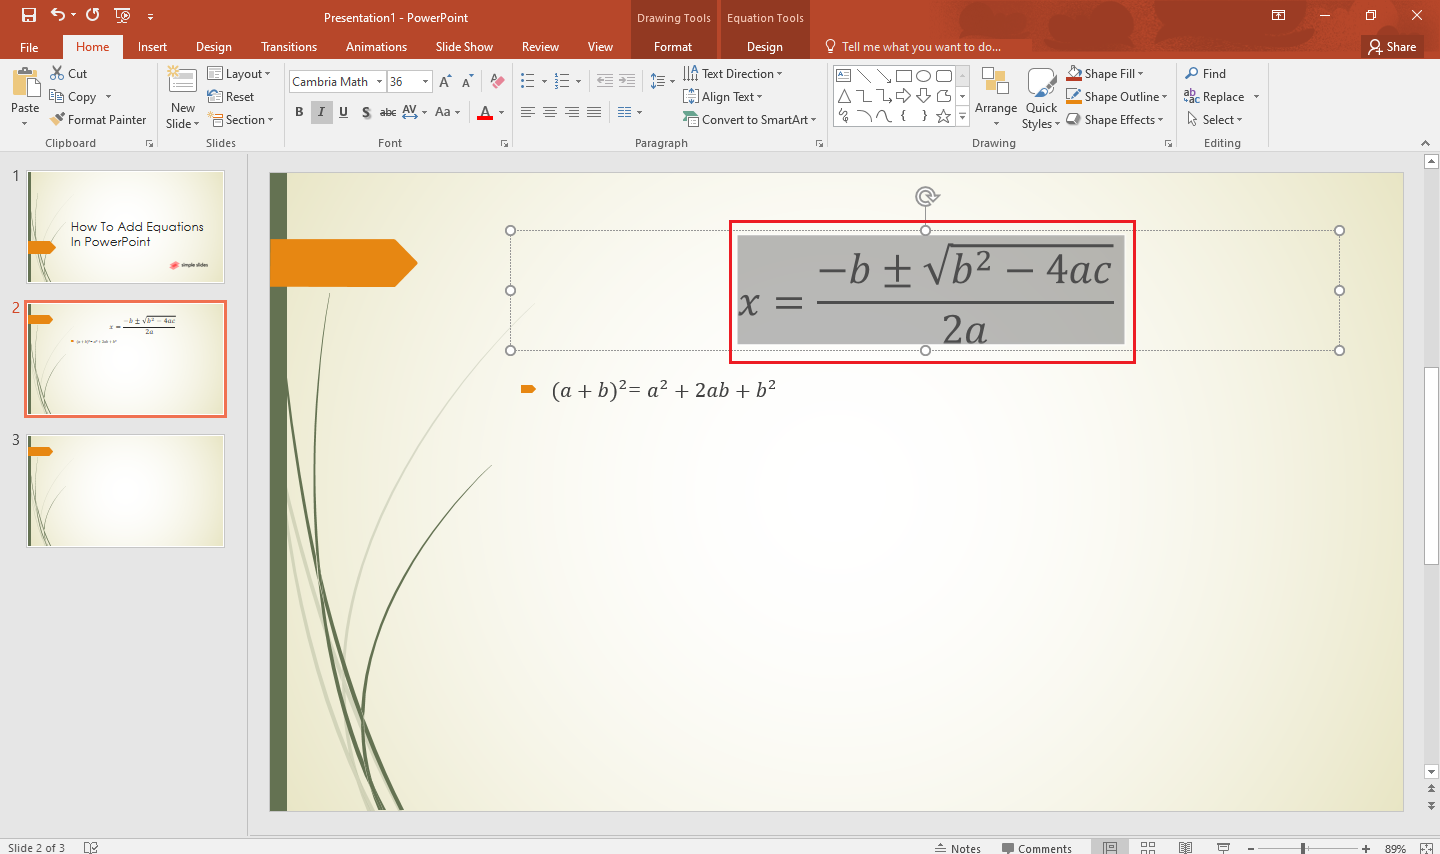 Select and highlight the equation you insert in the PowerPoint slide.